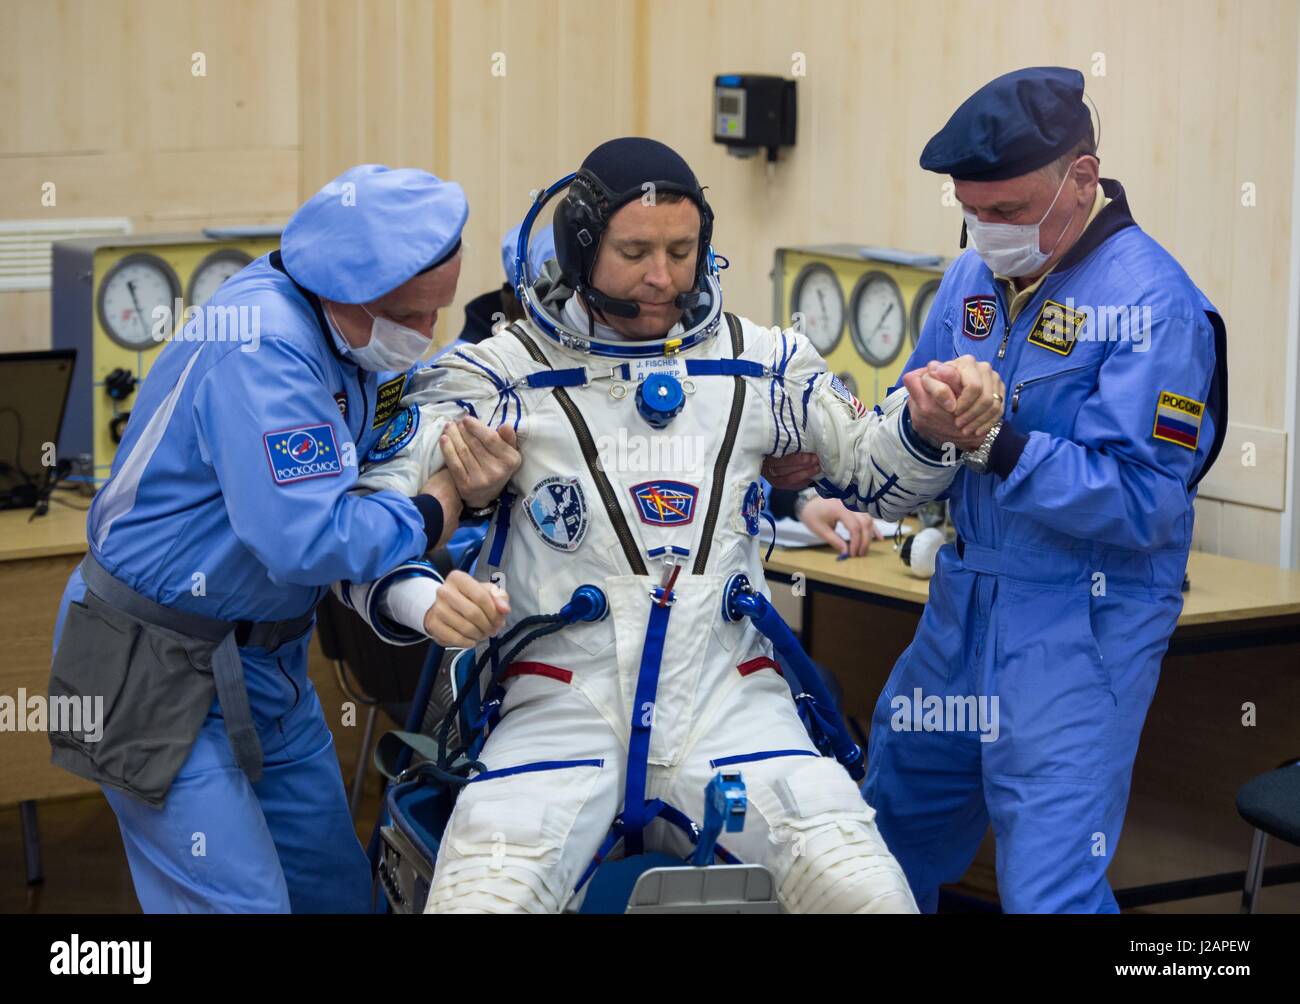 NASA International Space Station Expedition 51 prime crew member American astronaut Jack Fischer has his Russian Sokol launch and entry spacesuit pressure-checked in preparation for the Soyuz MS-04 launch at the Baikonur Cosmodrome April 20, 2017 in Baikonur, Kazakhstan.     (photo by Aubrey Gemignani /NASA  via Planetpix) Stock Photo